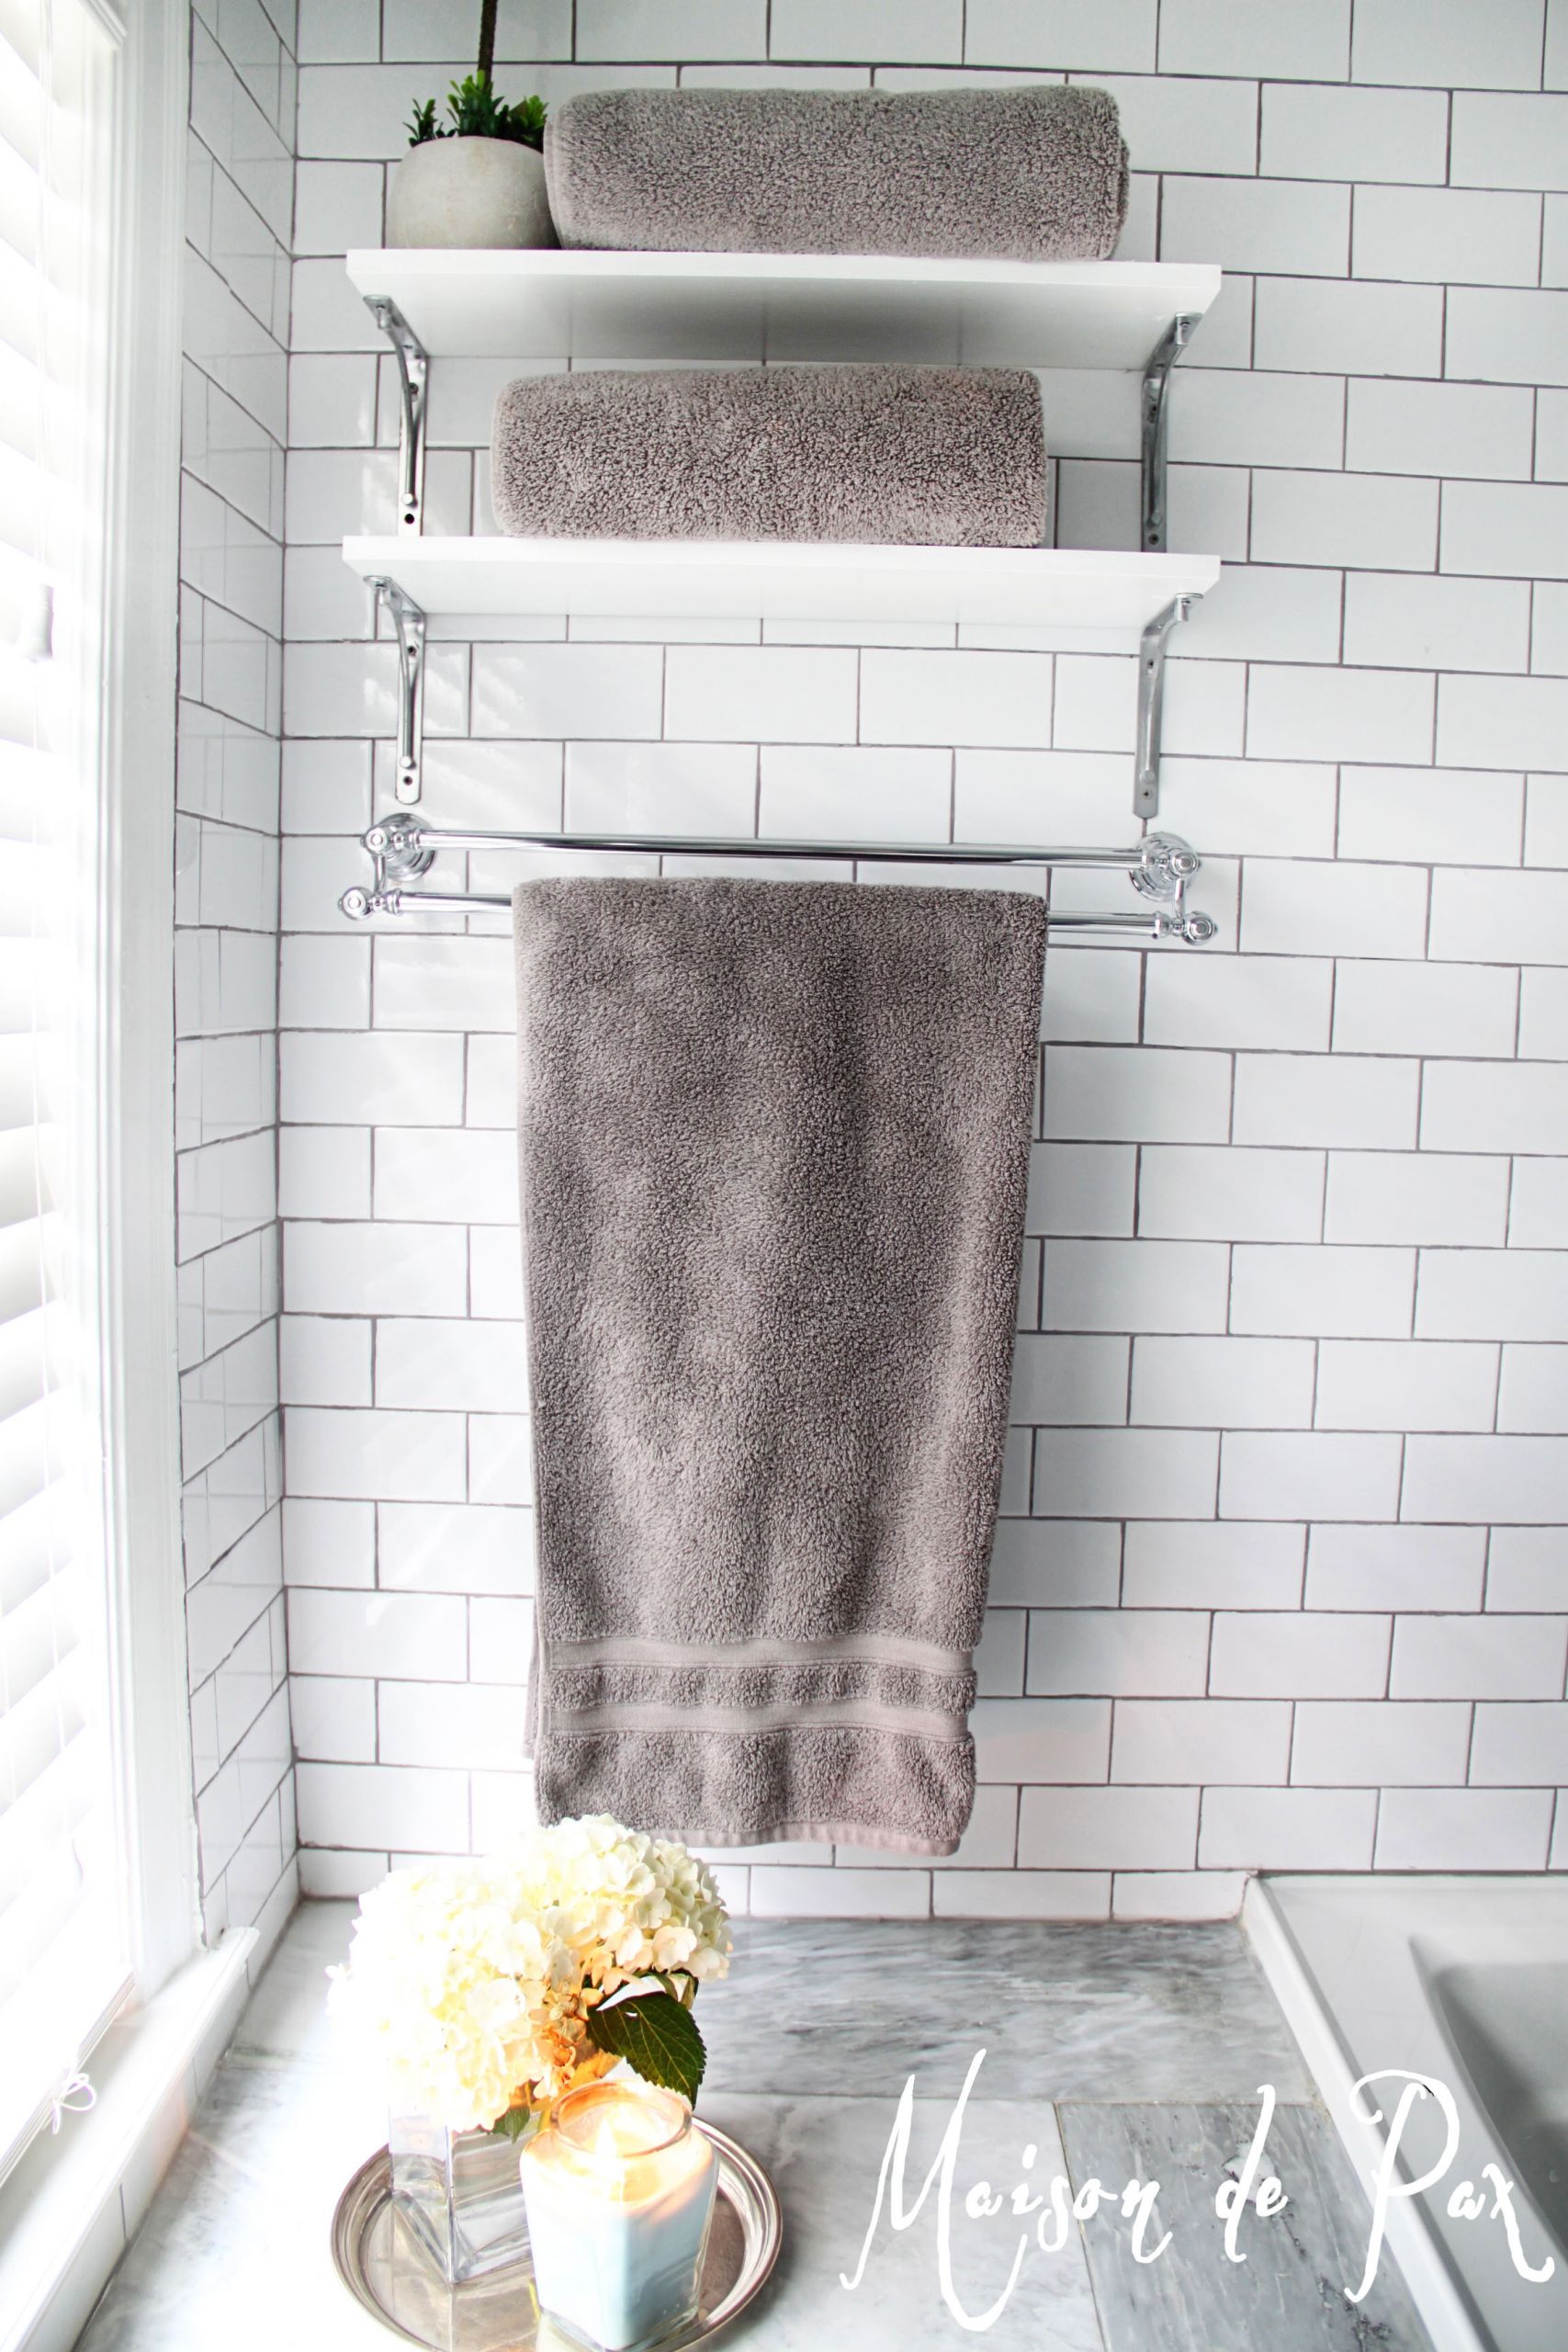 Towel Storage For Bathroom
 plete Your Bathroom with Storage for Towel